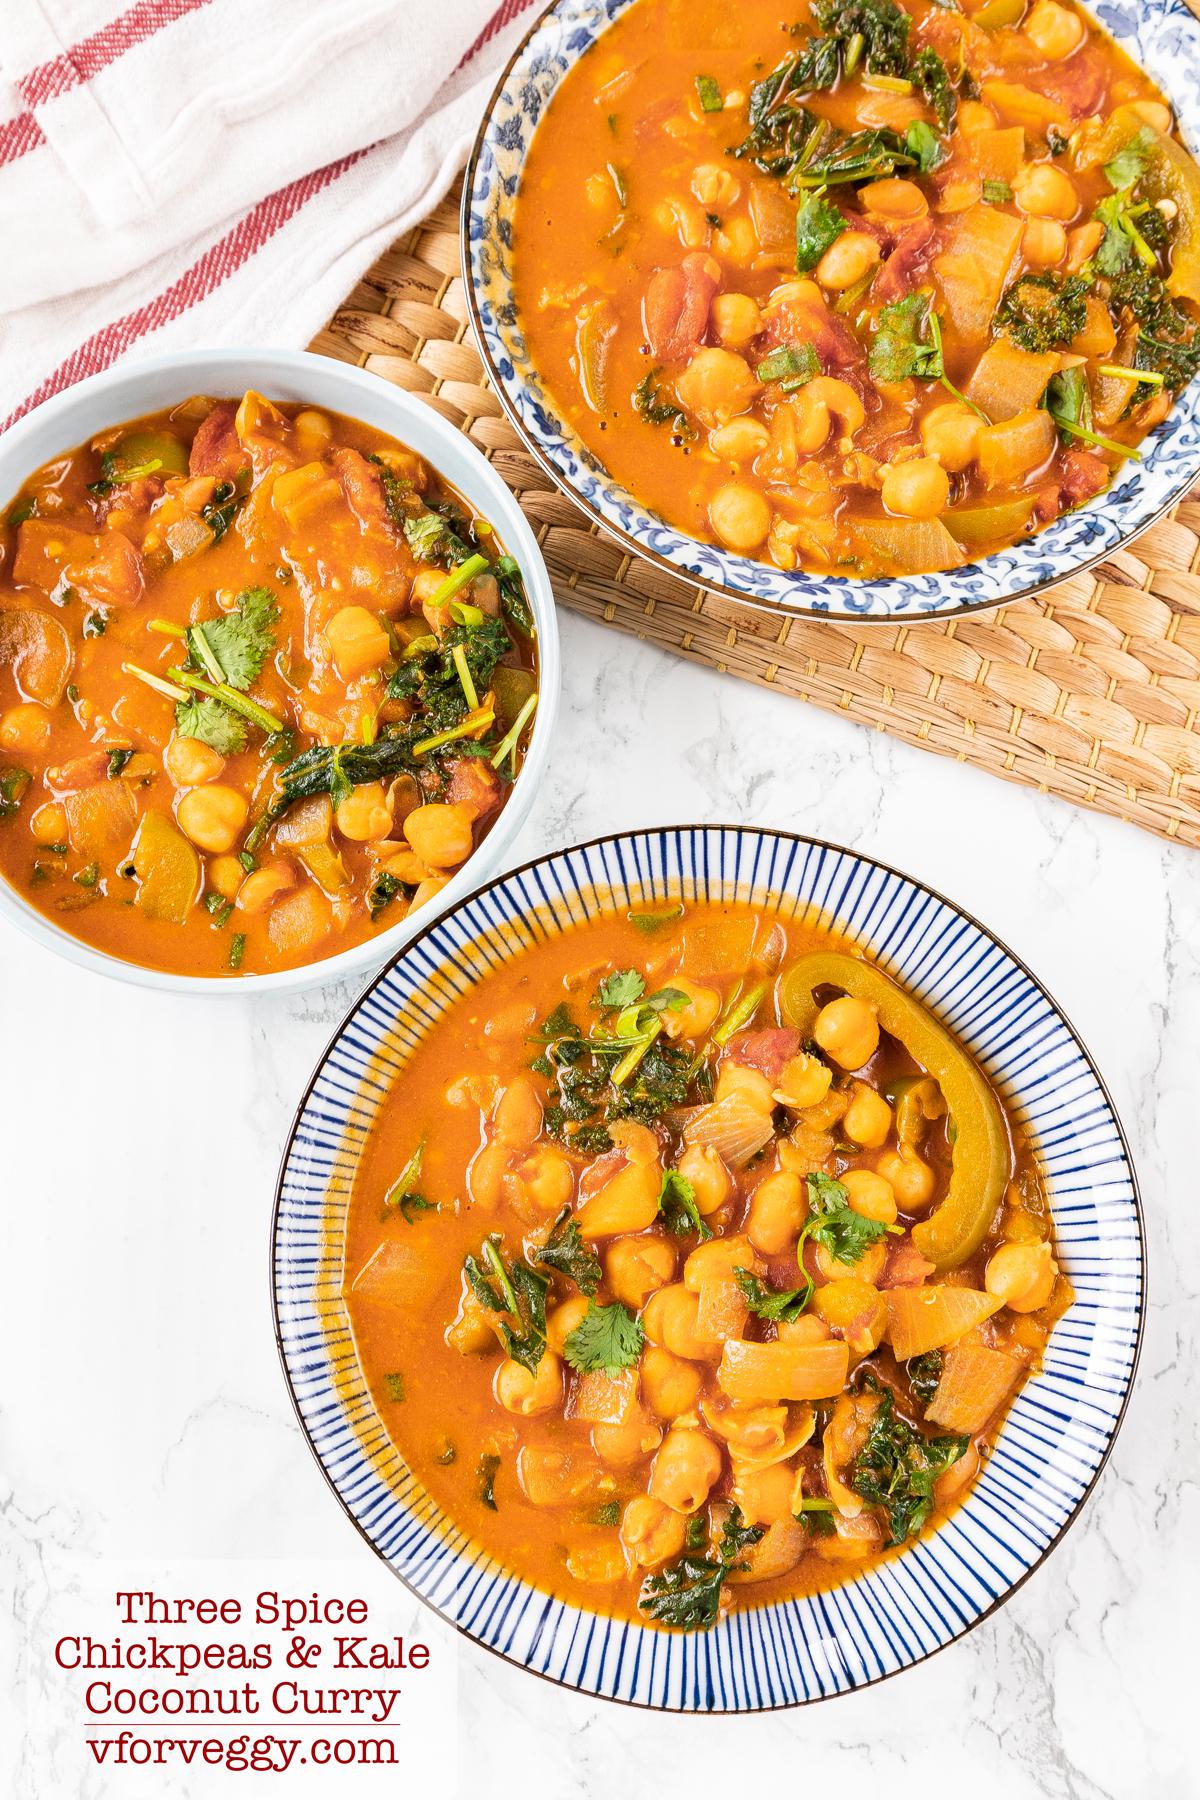 Three spice chickpeas and kale coconut curry.